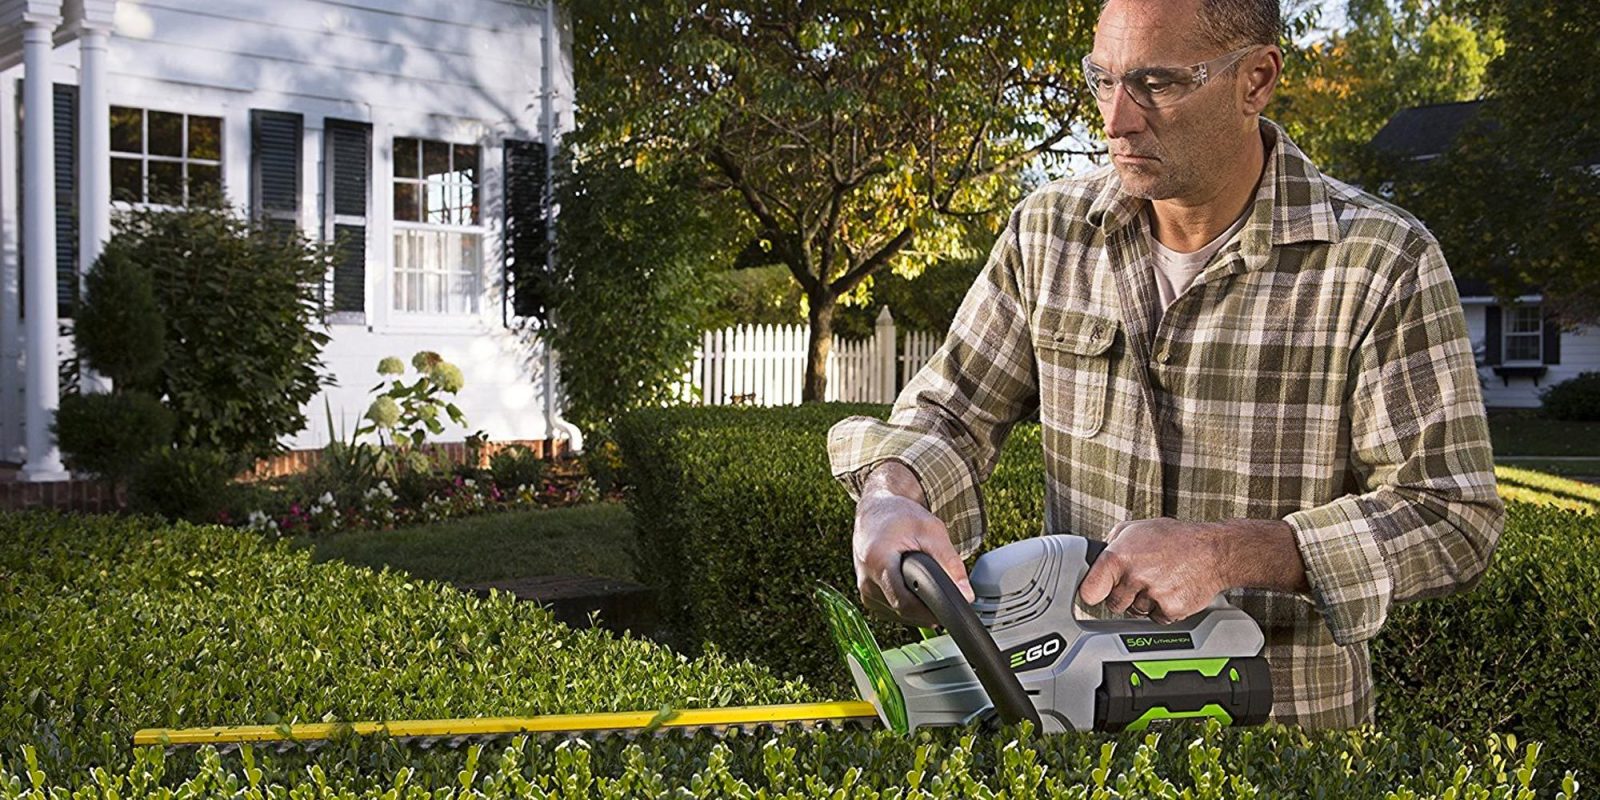 This hedge trimmer will up your curb appeal for less than $50